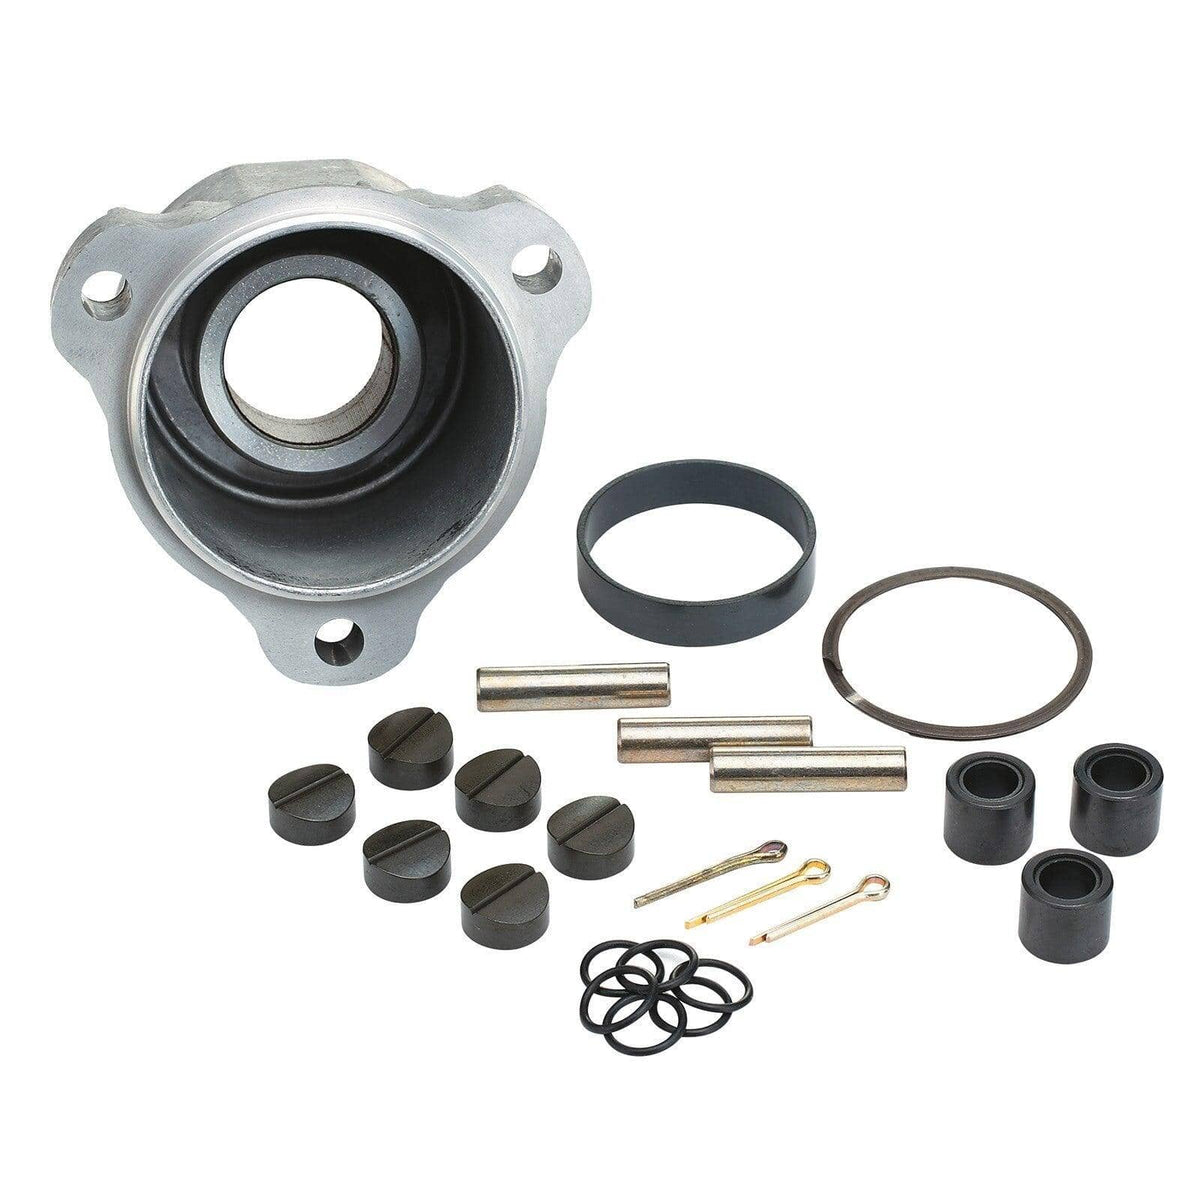 Maintenance Kit for TRA Drive Pulley - 2008 to 2010 (800R P-TEK &amp; 800R E-TEC)